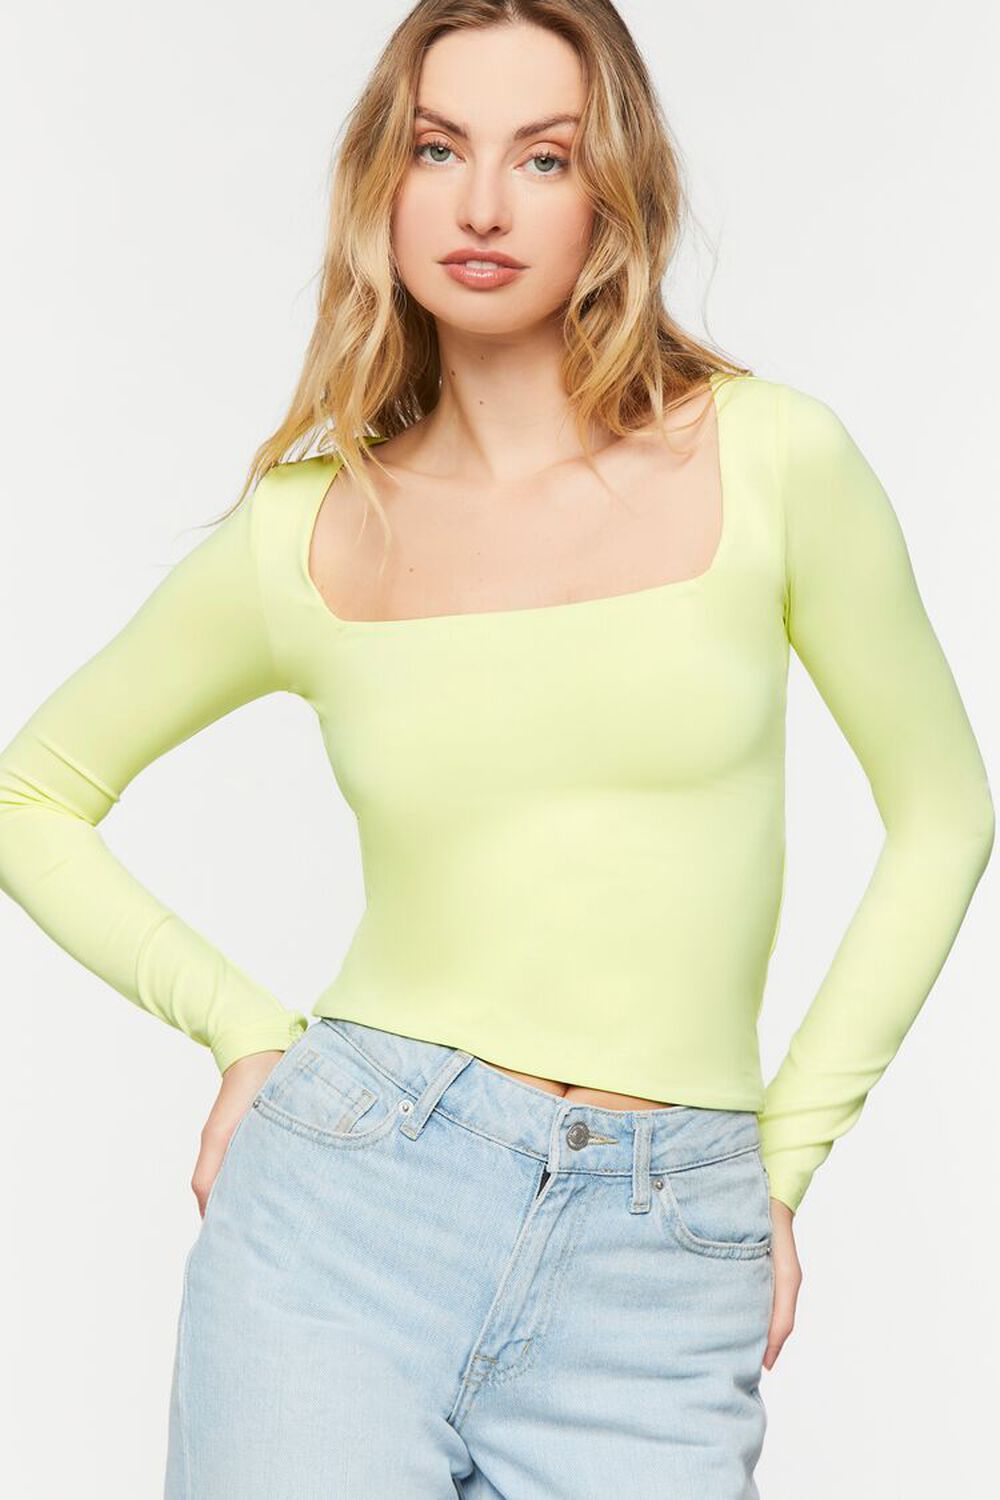 BUTTERFLY GREEN Long-Sleeve Square-Neck Top, image 1